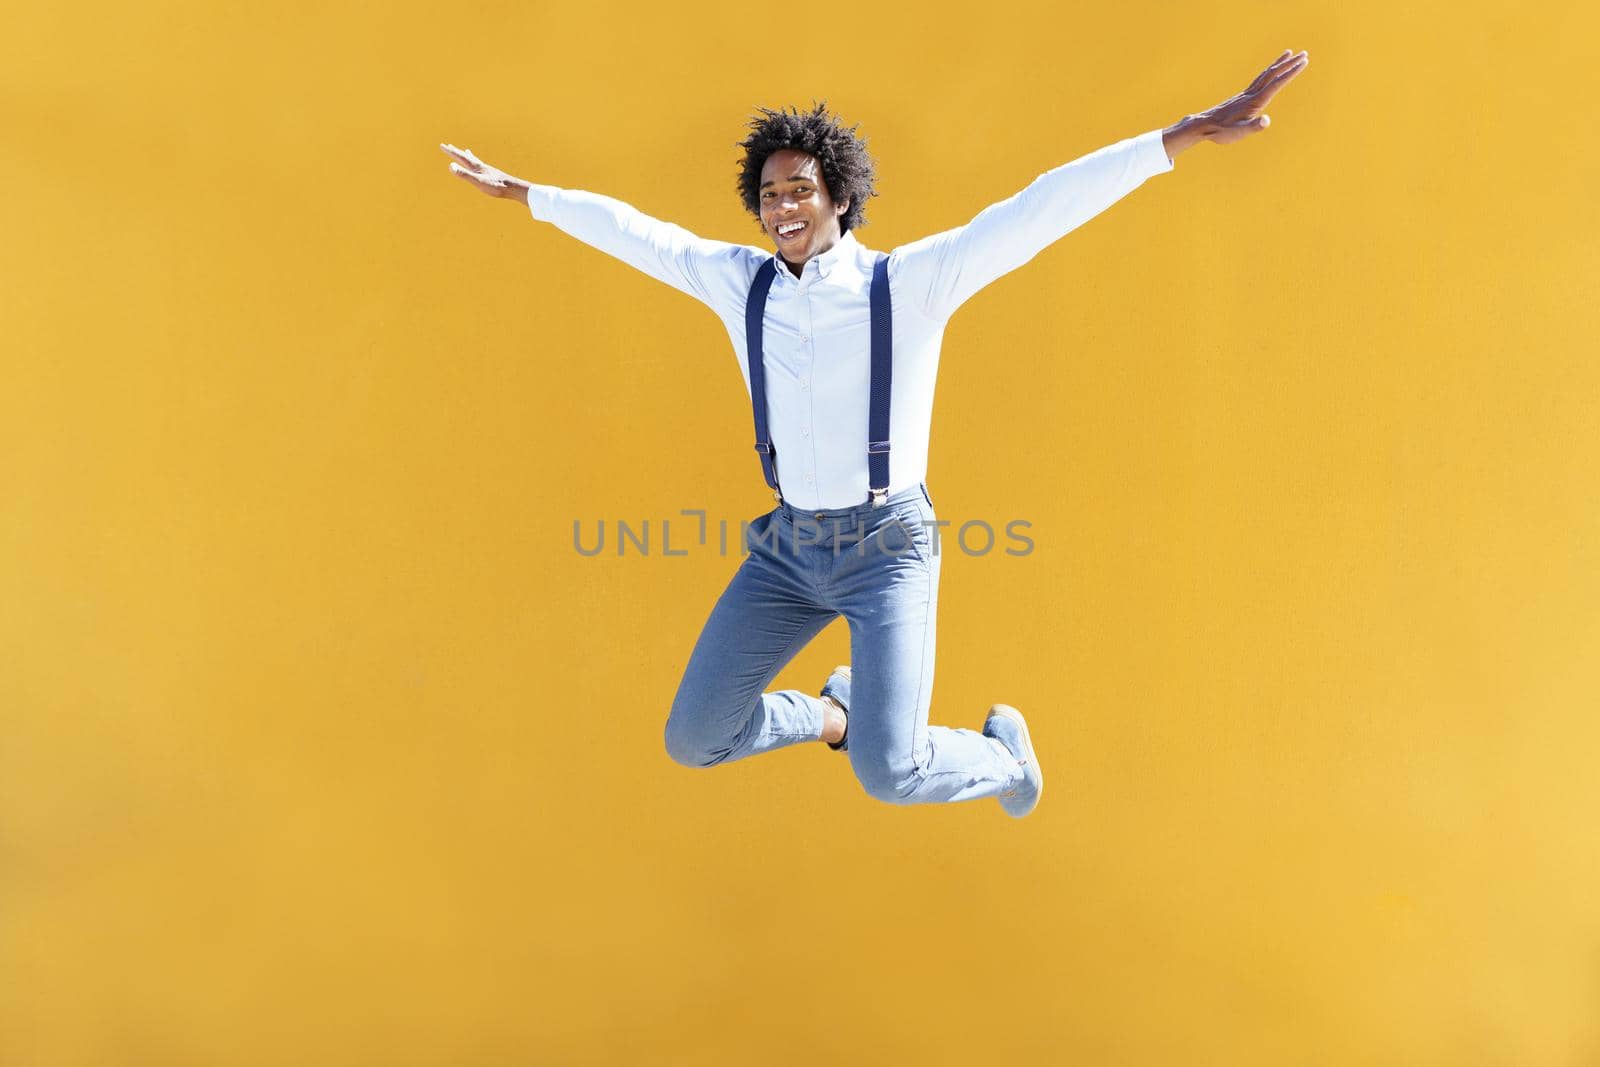 Black man with afro hair jumping on a yellow urban background by javiindy